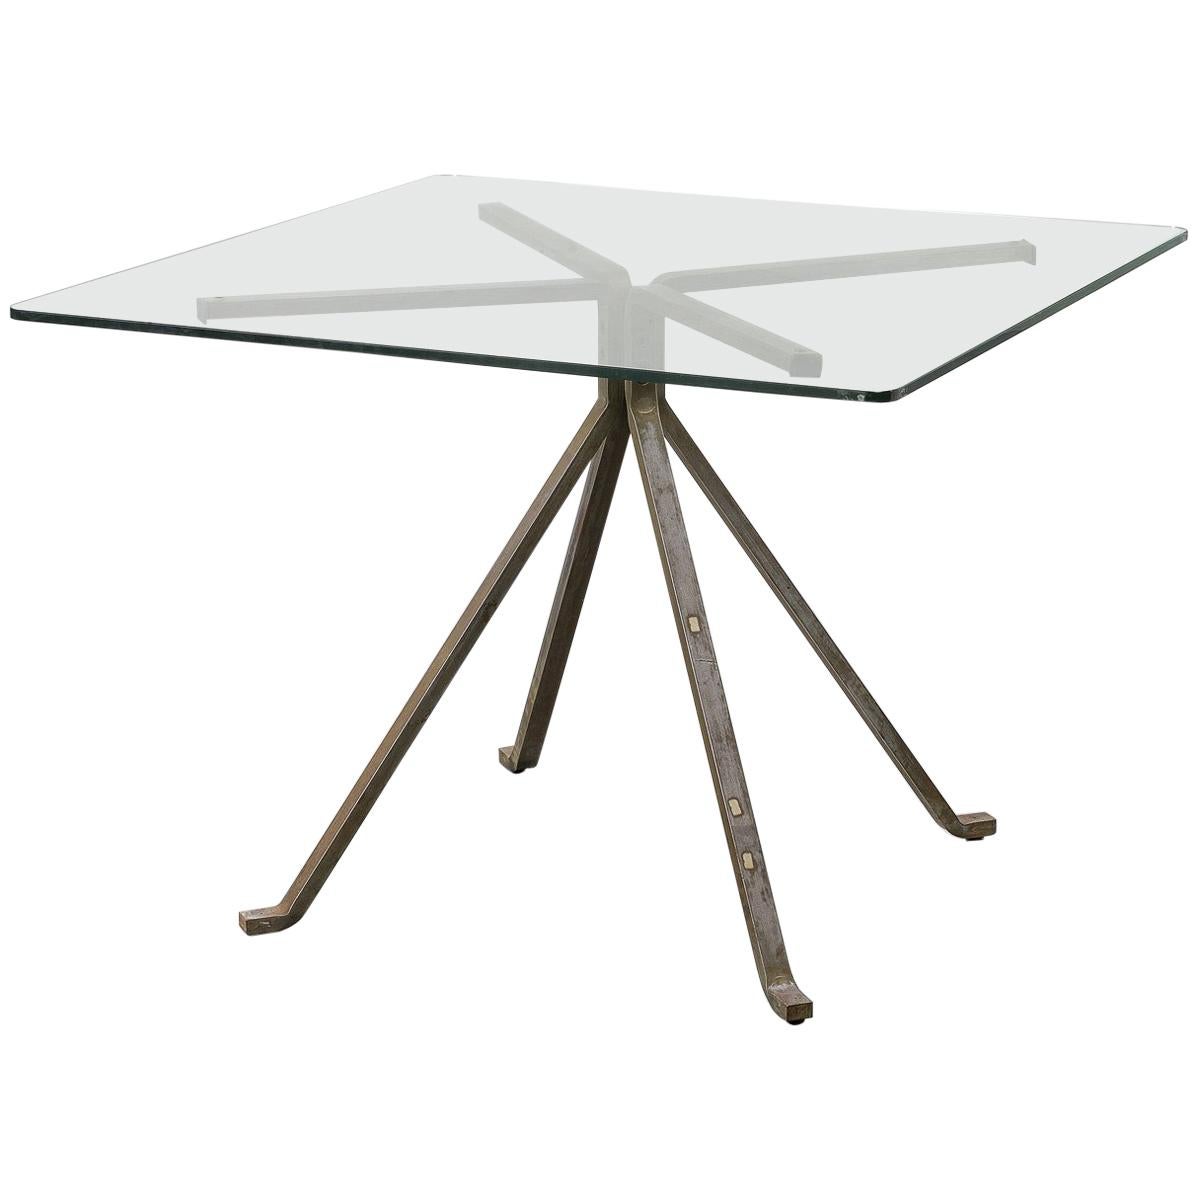  "Cugino" Tempered Glass and Steel Table by Enzo Mari for Driade, circa 1973 For Sale